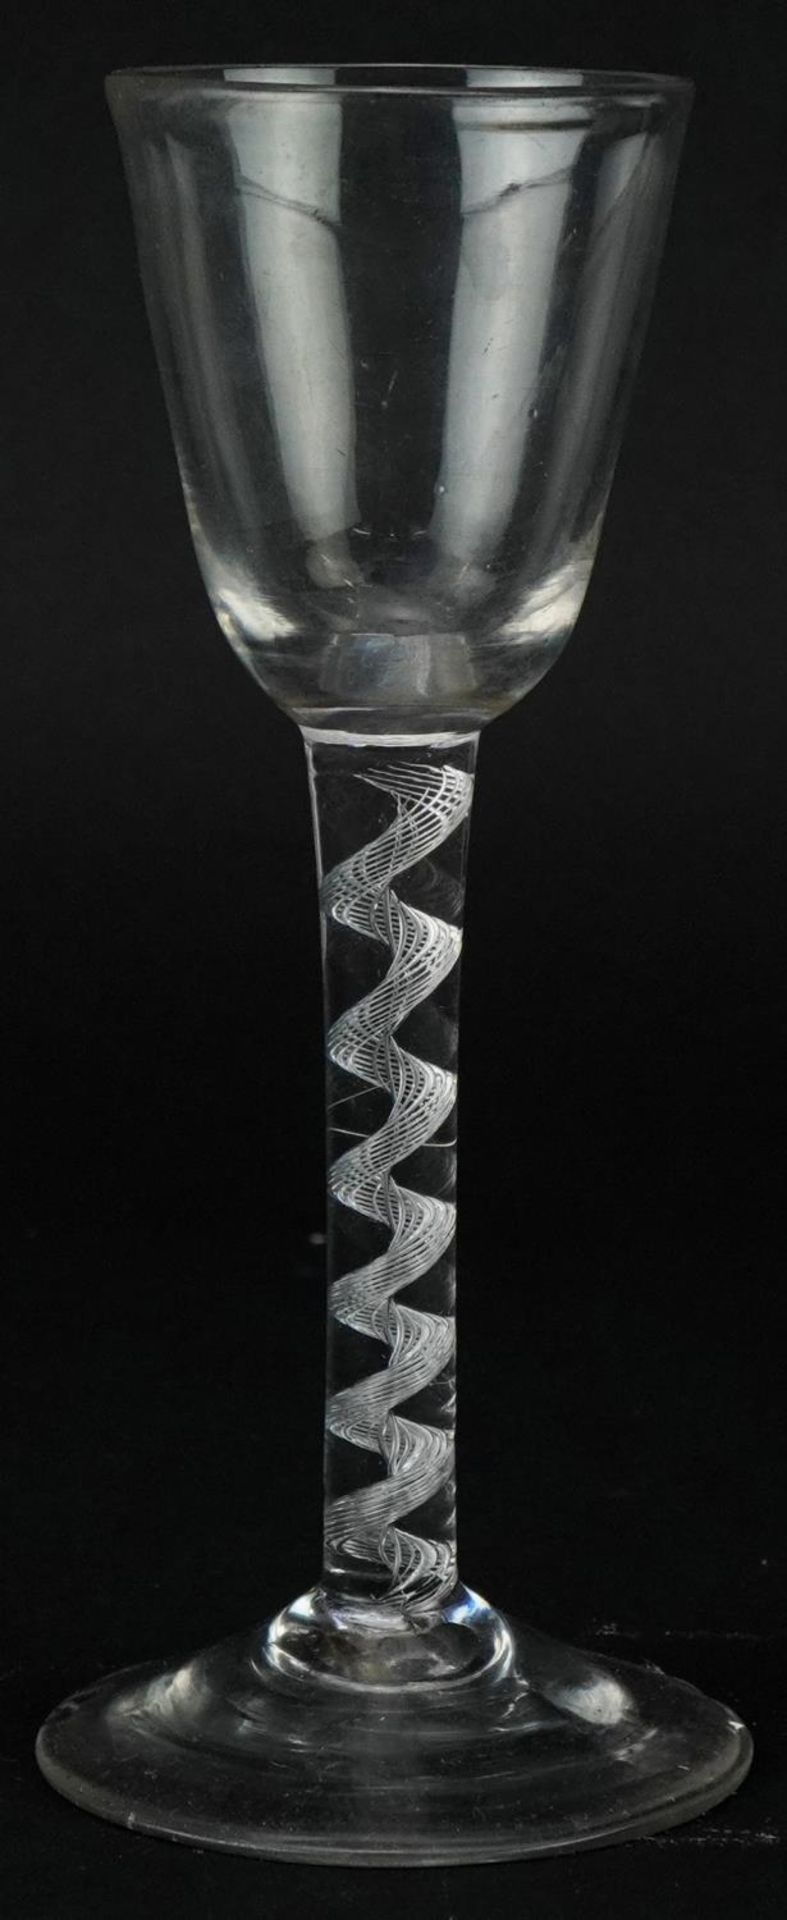 18th century wine glass with air twist stem, 15.5cm high - Image 3 of 4